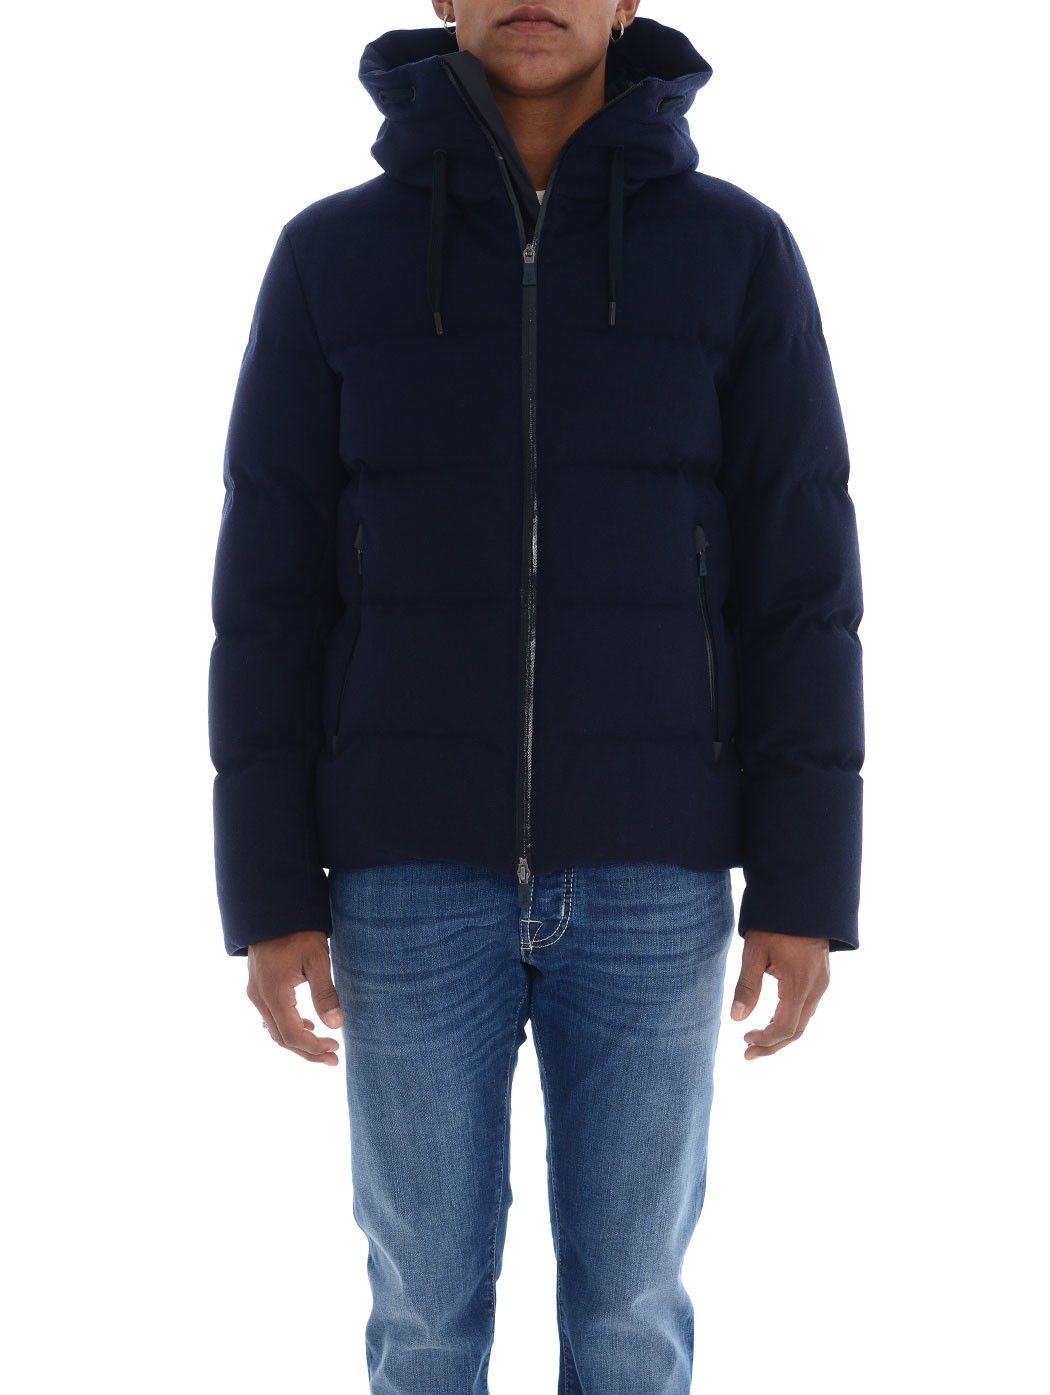  MAN COLLECTION,FALL WINTER,CHURCH'S,MONCLER,MONCLER GRENOBLE,HERNO,WOOLRICH,MSGM,NEIL BARRETT,STONE ISLAND,BLUNDSTONE  HERNO PI212UL-33292